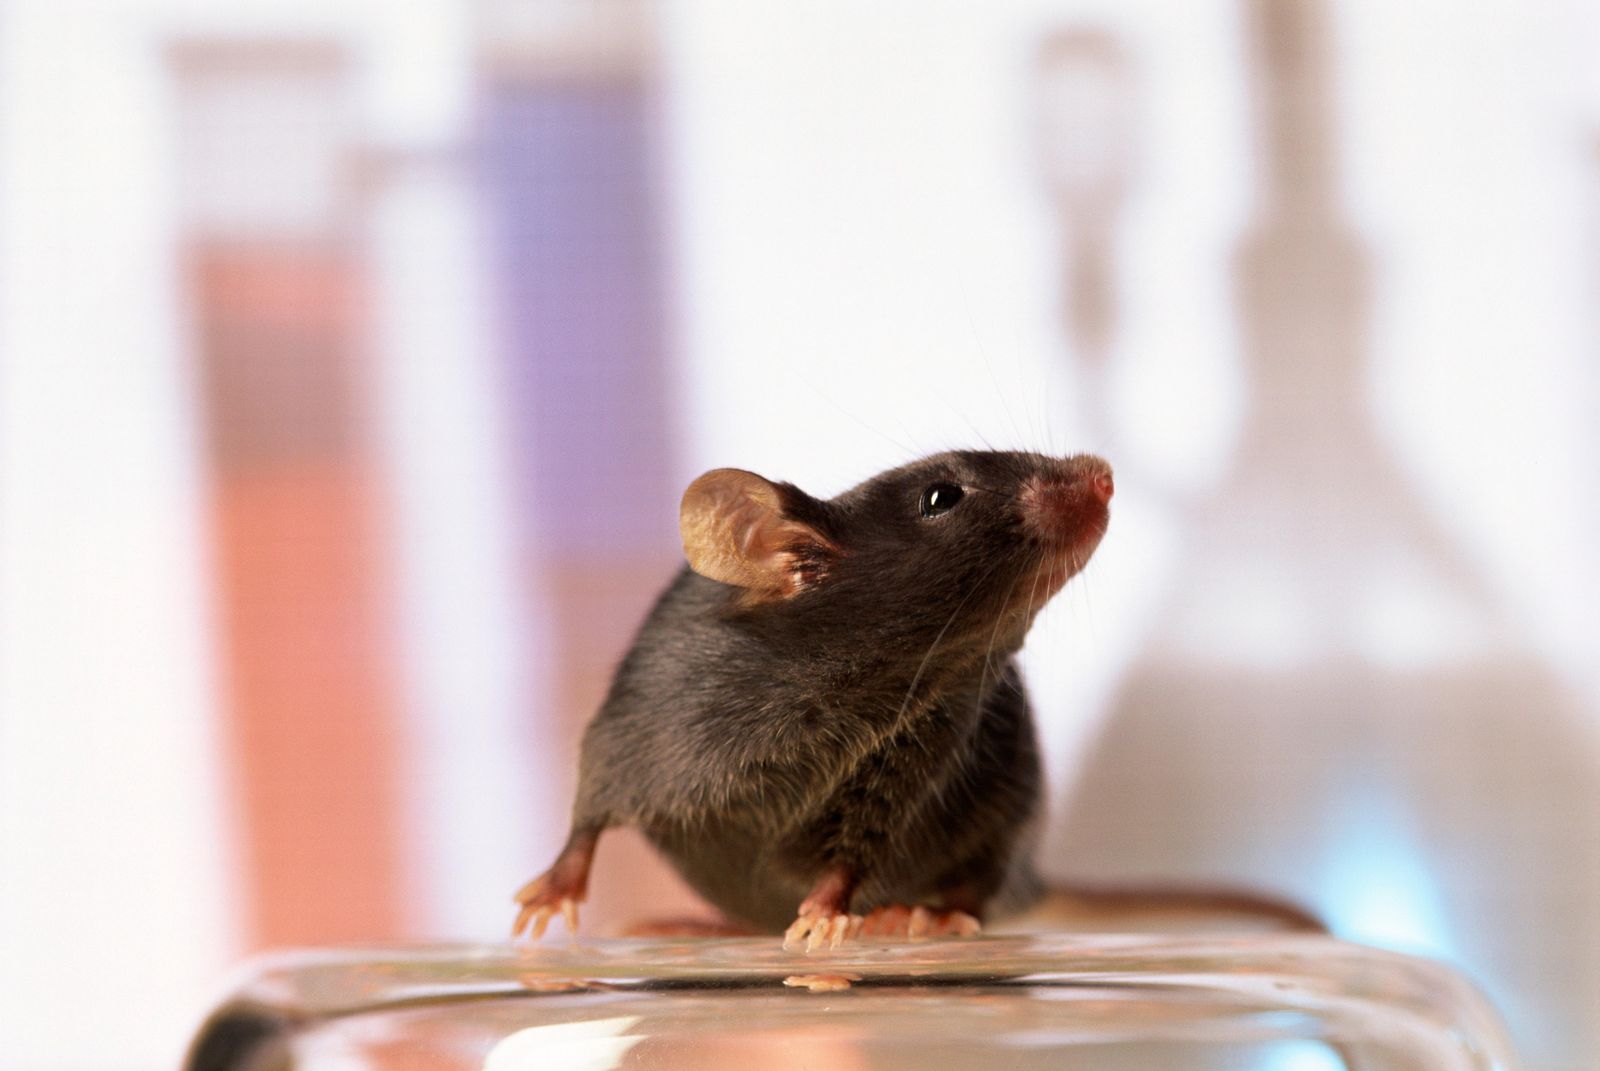 Half the Cells in This Mouse's Brain Are Human | Smart News| Smithsonian  Magazine